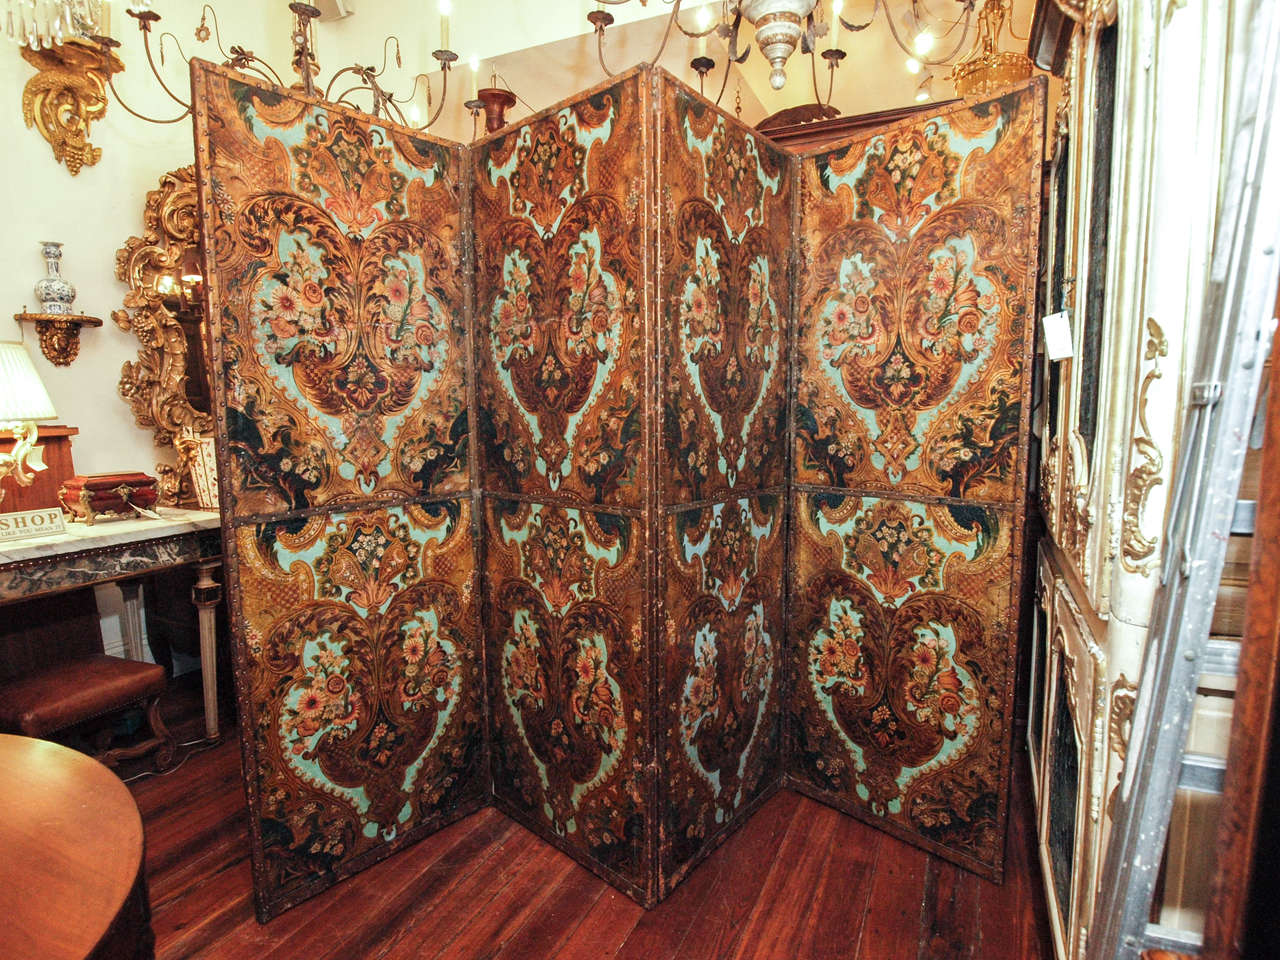 17th c. Spanish Cordovan Polychromed leather panels now as a screen of four panels with eight panels of leather. Leather is tooled and polychromed. It has expected tears and shrinkage for its age